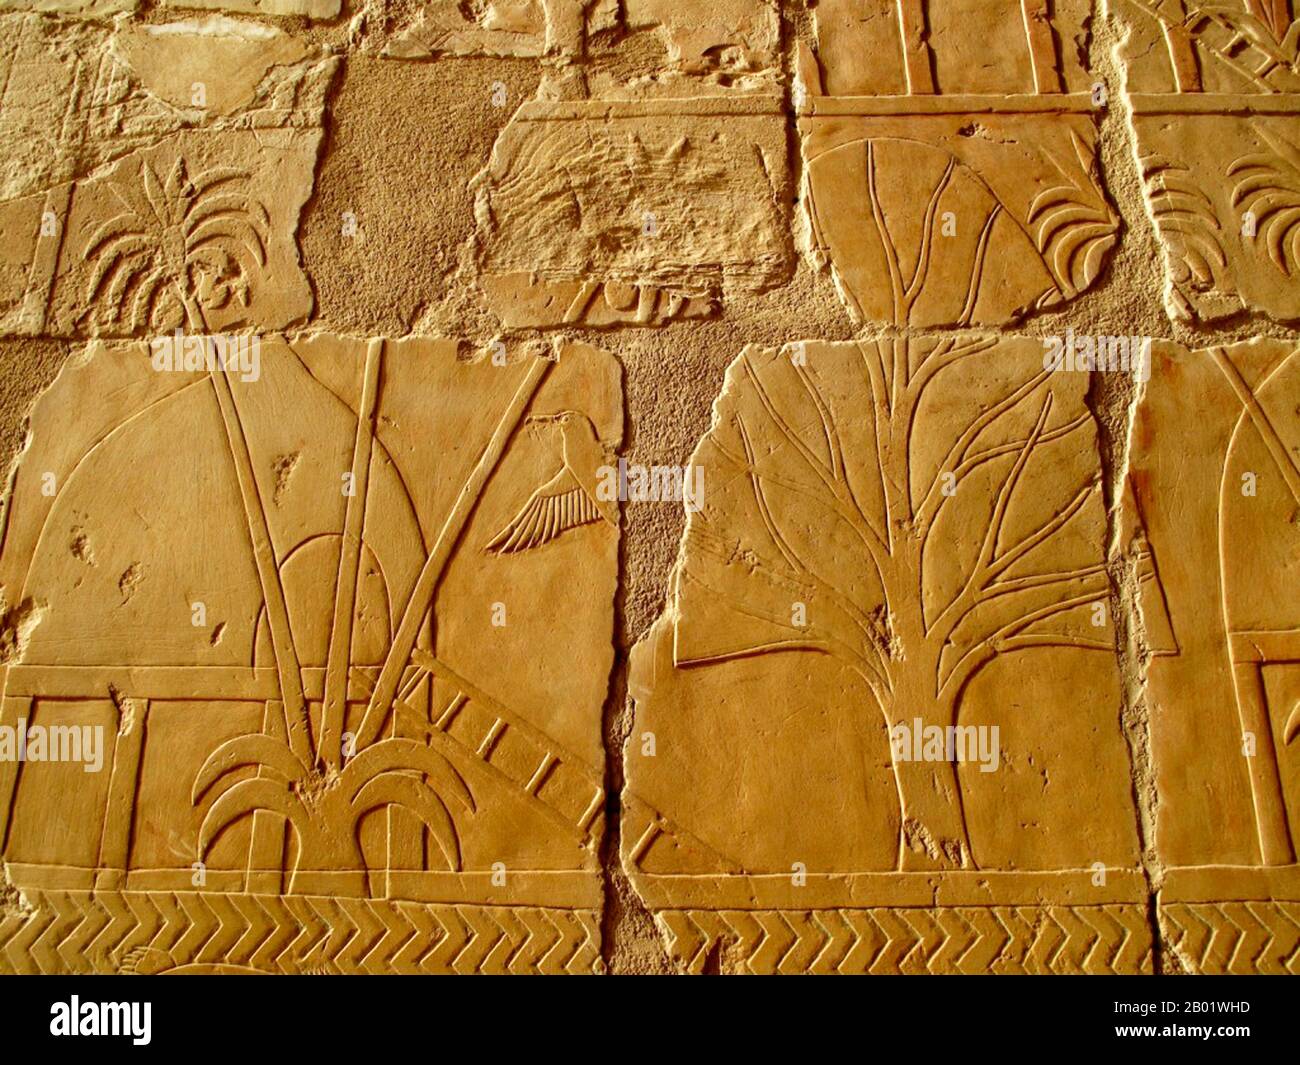 Egypt: Relief depicting the incense and myrrh trees obtained by Queen Hatshepsut's expedition to Punt, c. 1480 BCE.  Hatshepsut established the trade networks that had been disrupted during the Hyksos occupation of Egypt during the Second Intermediate Period, thereby building the wealth of the eighteenth dynasty.  She oversaw the preparations and funding for a mission to the Land of Punt. The expedition set out in her name with five ships, each measuring 21 m (70 feet) long and accommodating 210 men that included sailors and 30 rowers. Many trade goods were bought in Punt, notably myrrh. Stock Photo